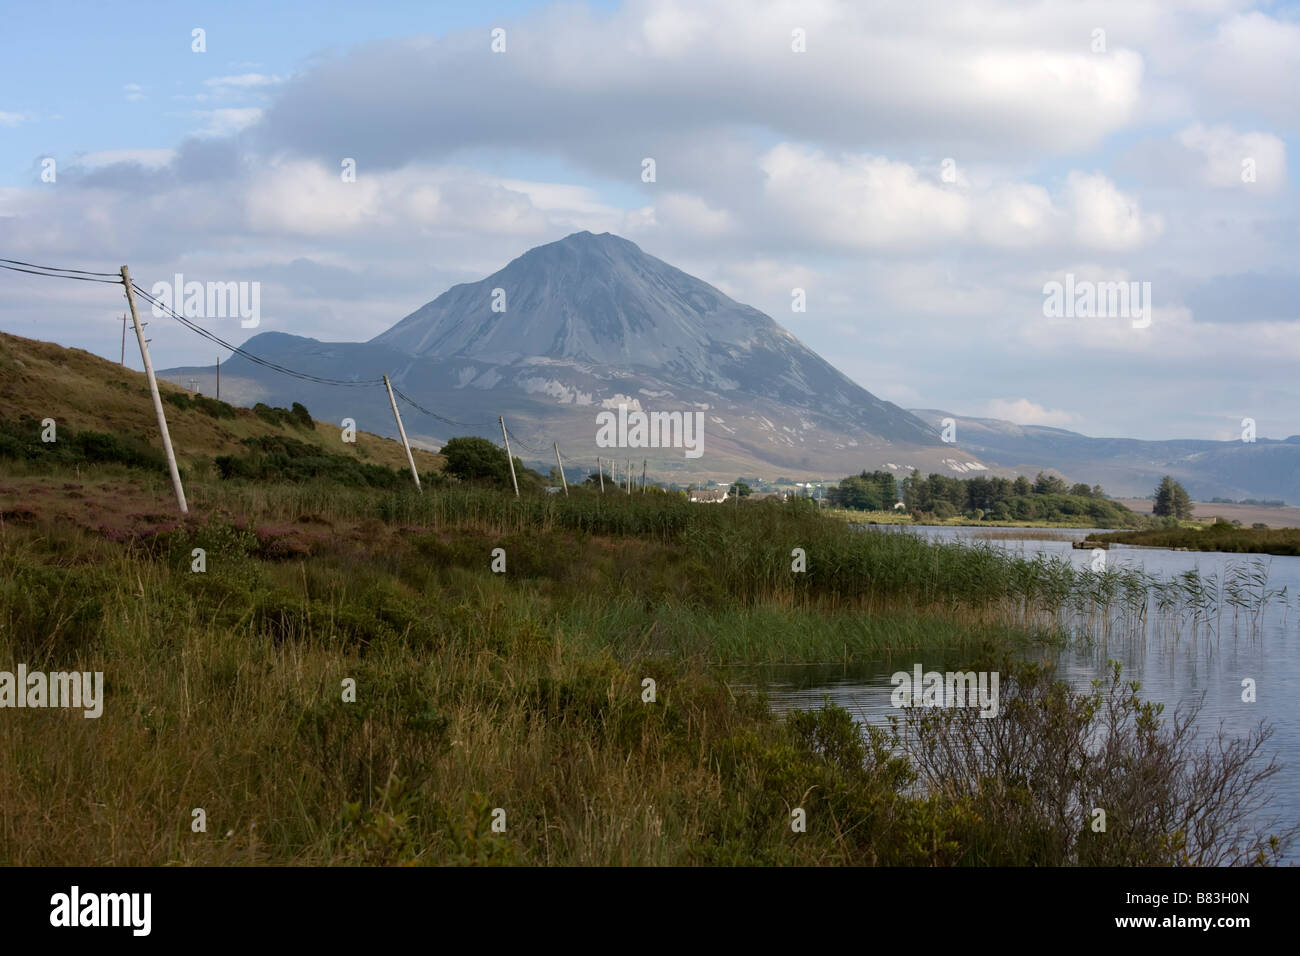 Errigal Mountain Gweedore Region, County Donegal, Irland Stockfoto